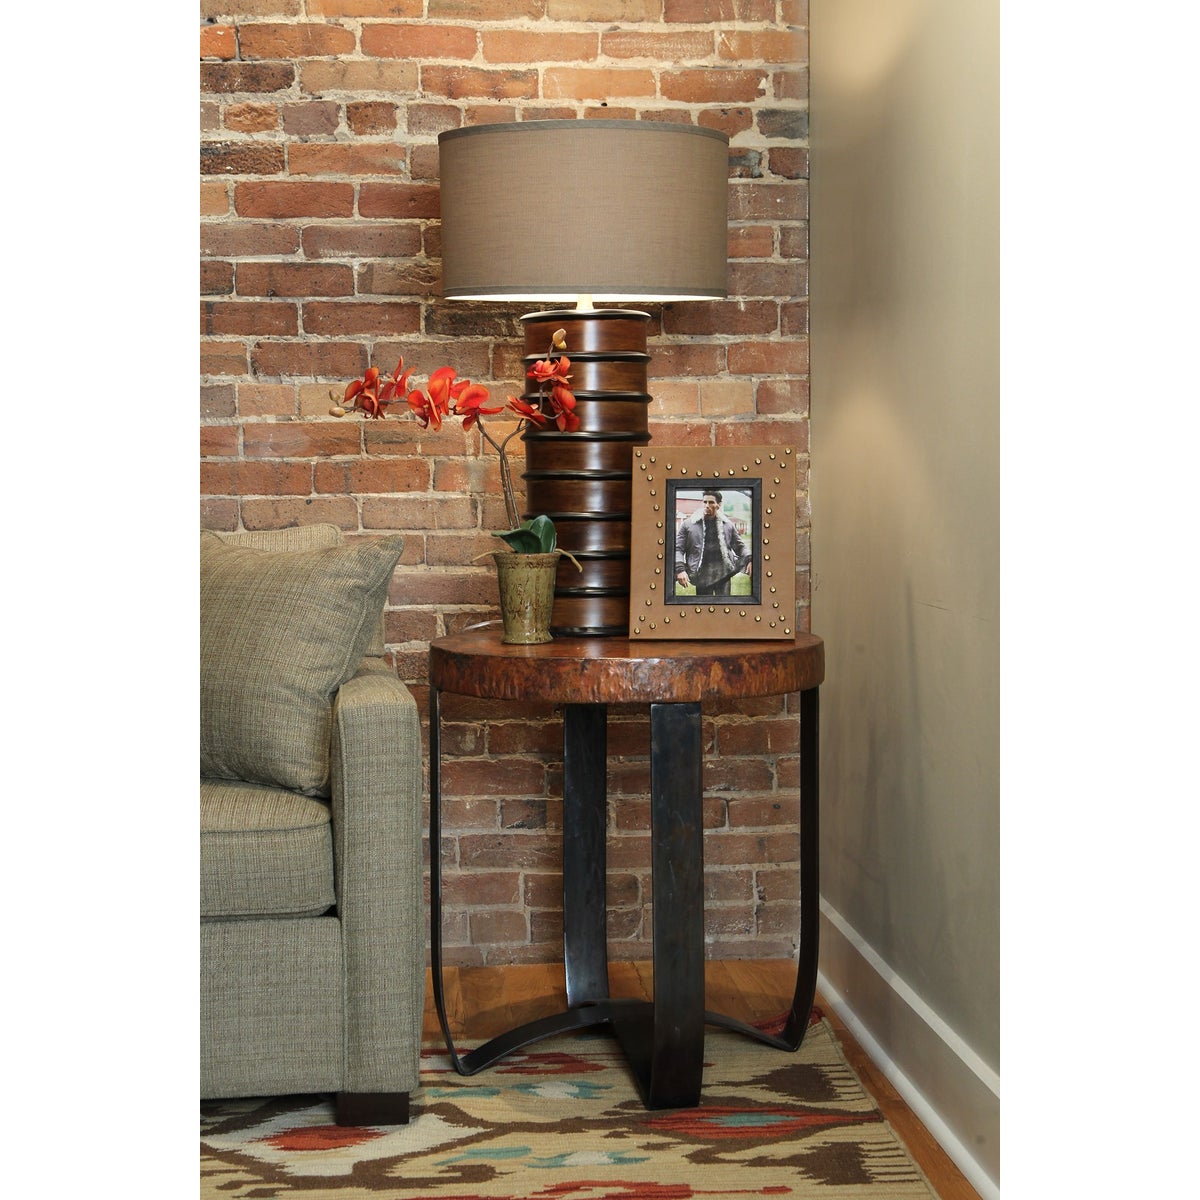 Round Strap End Table with Hammered Copper Top